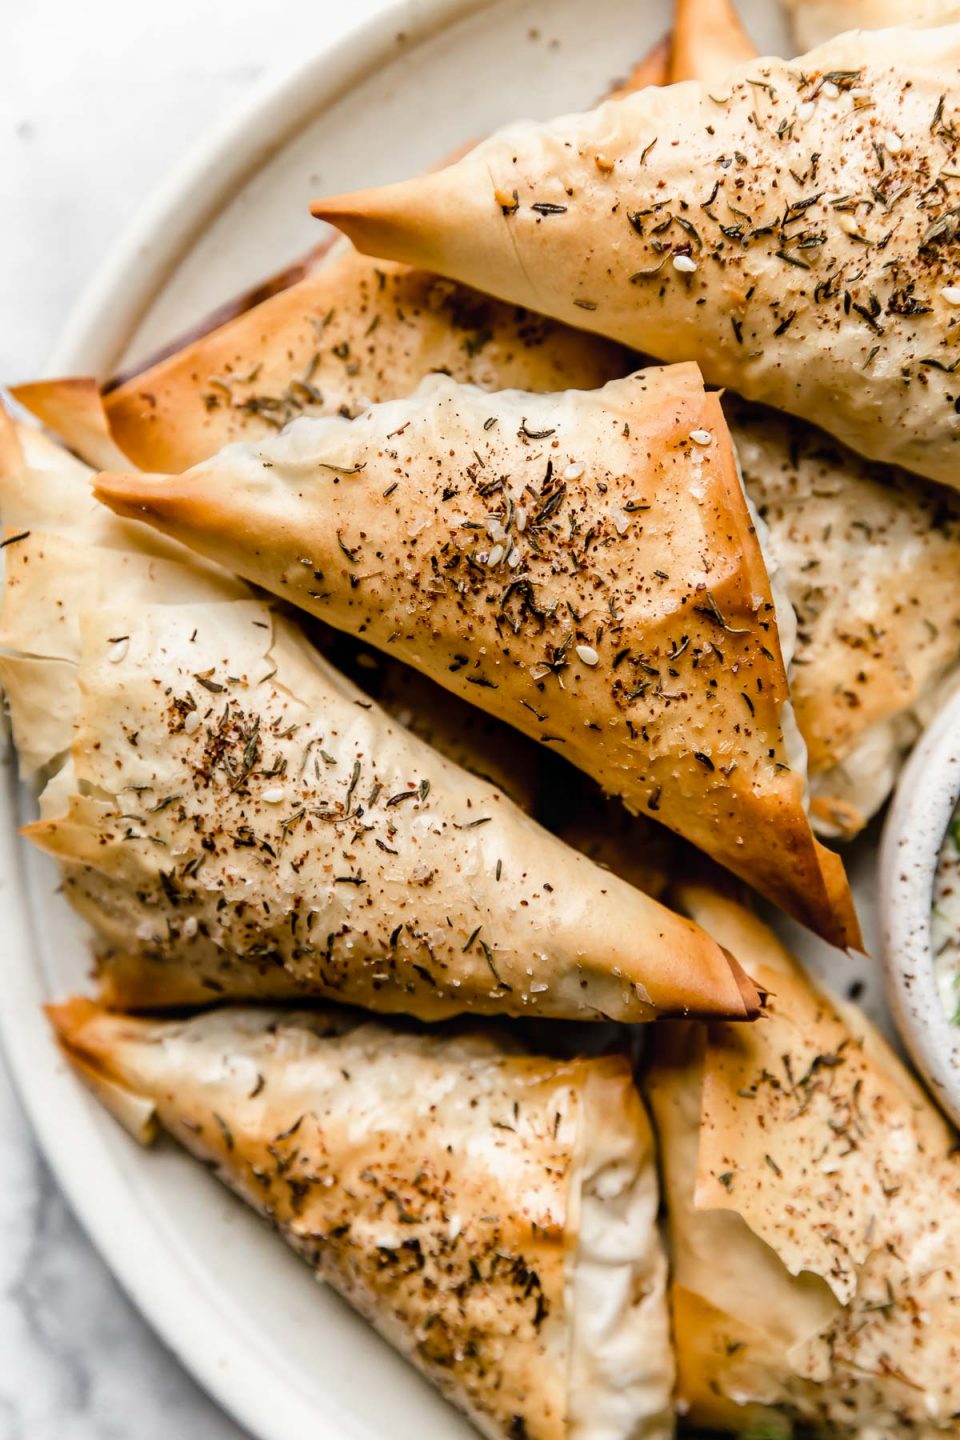 Baked Spanakopita triangles on a ceramic plate.